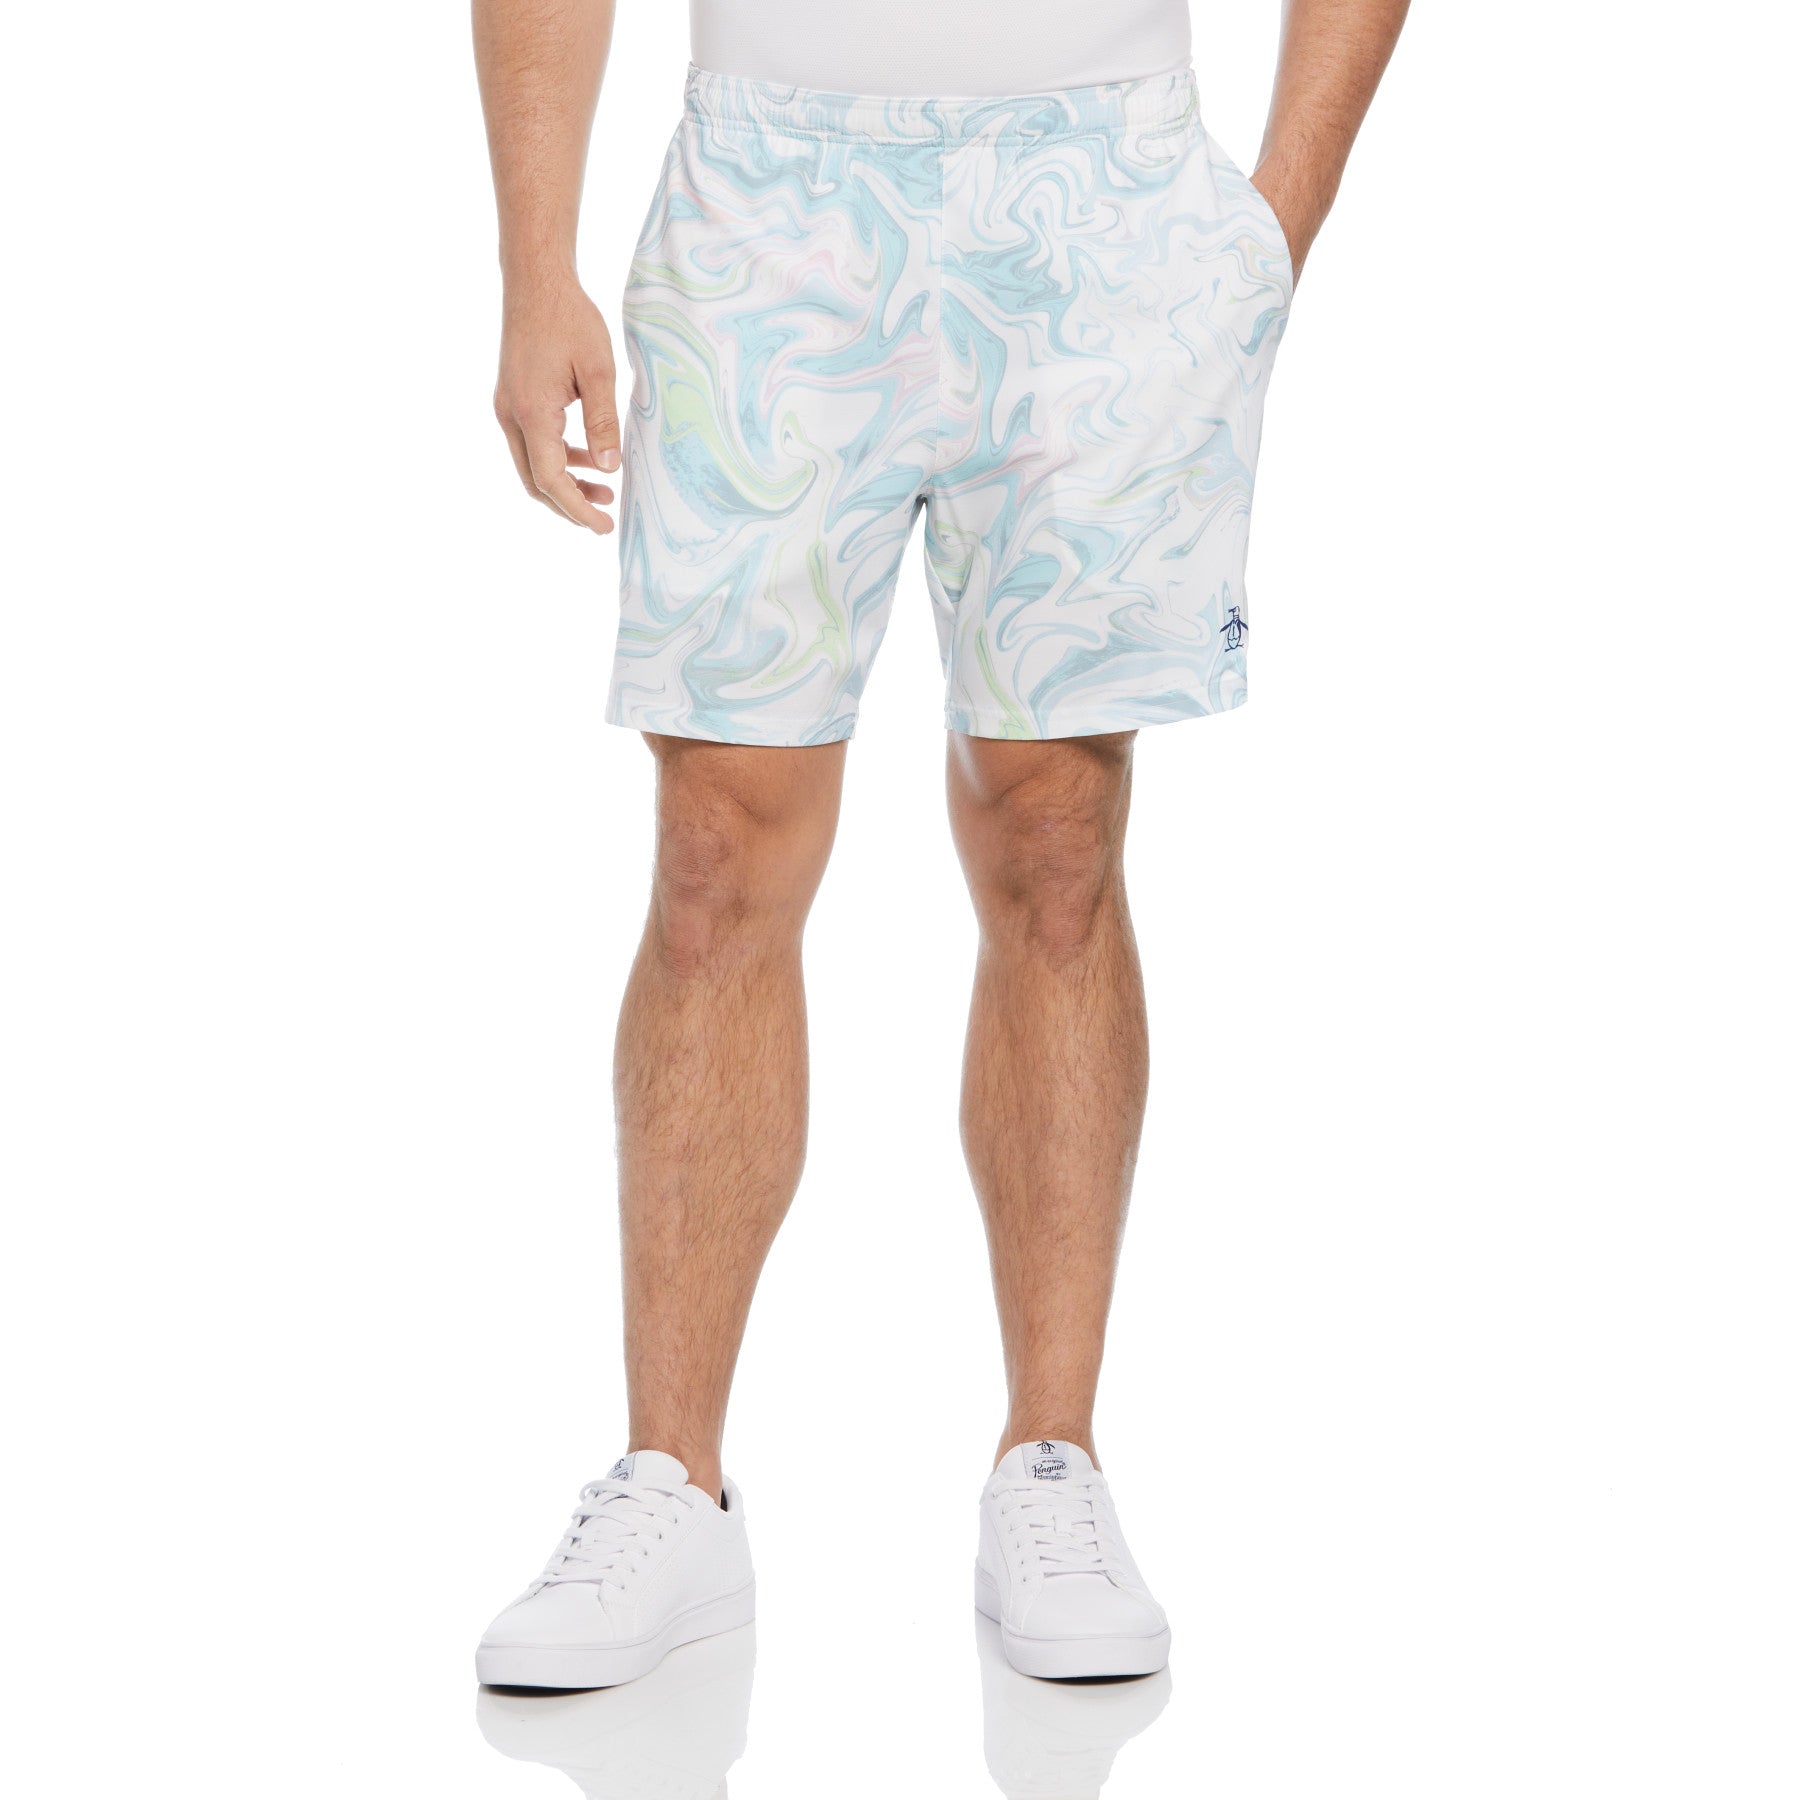 View Marble Print Performance Tennis Shorts In Bright White information